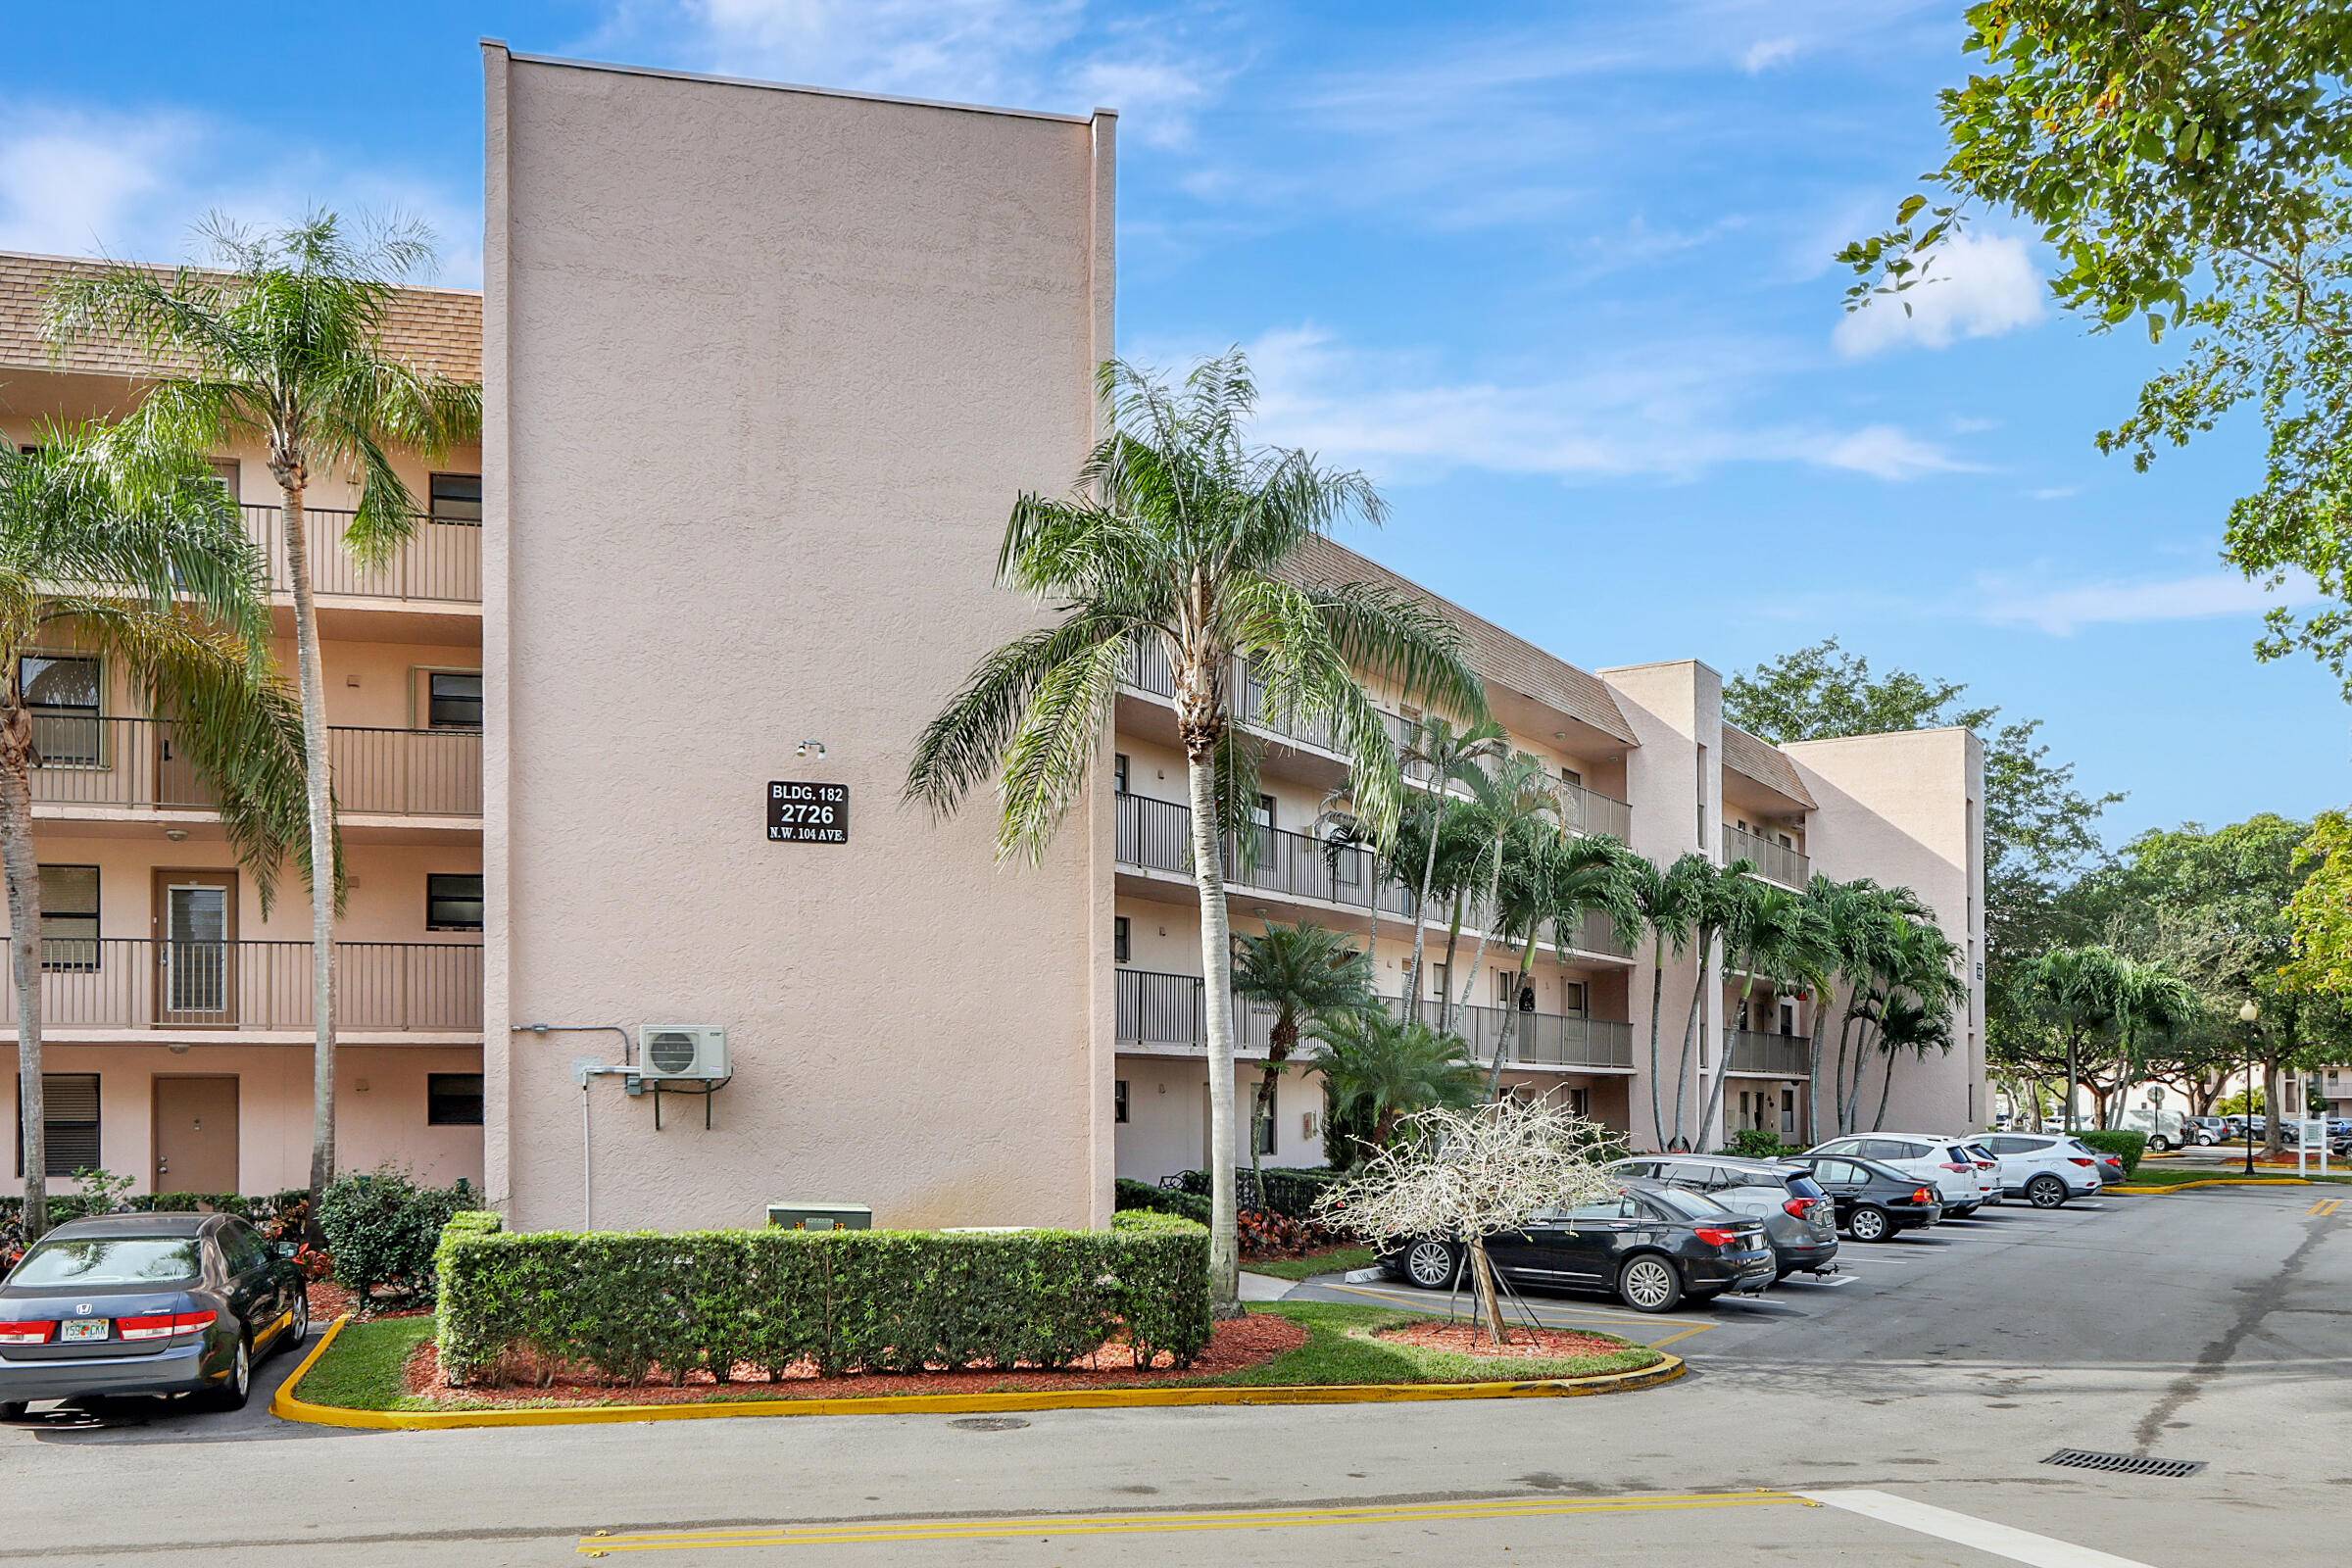 CLASSIC FLORIDA CONDO LIVING, 2 BED 2 BATH 2ND FLOOR CORNER UNIT WITH LAKE VIEW IN SERENE 55 GOLF COMMUNITY.